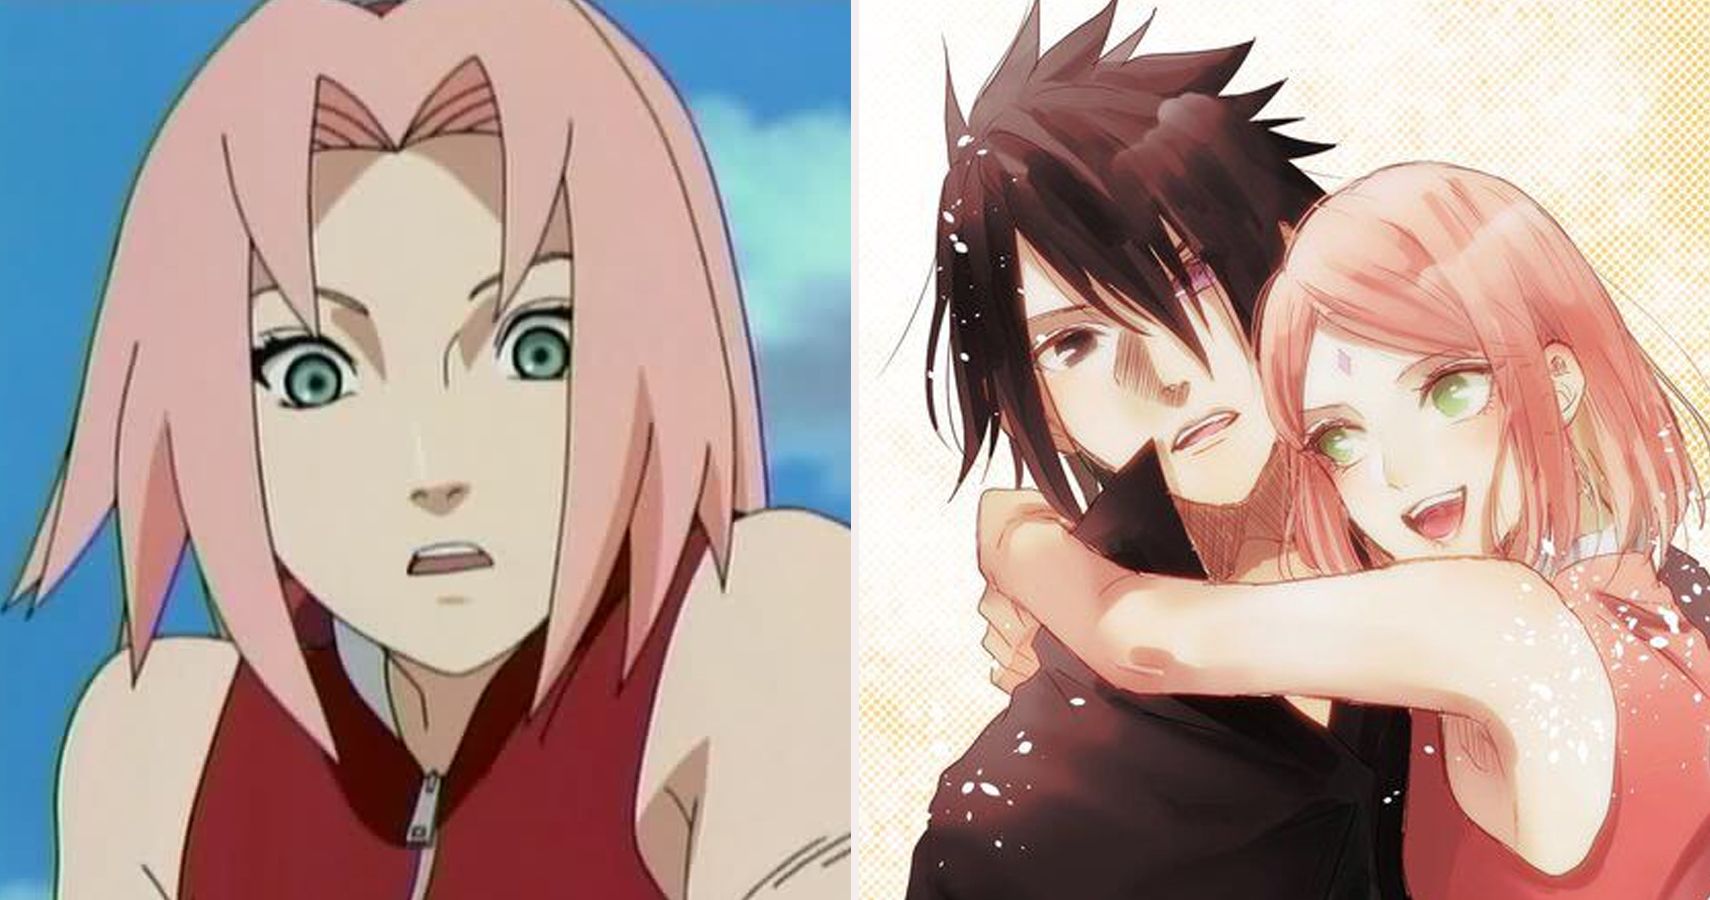 Sasusaku - Welcome home 😳🥺 During a Jump Festa in 2010 when an  interviewer asked about Sakura's feelings for both Naruto and Sasuke,  Masashi Kishimoto stated that although Naruto is close and